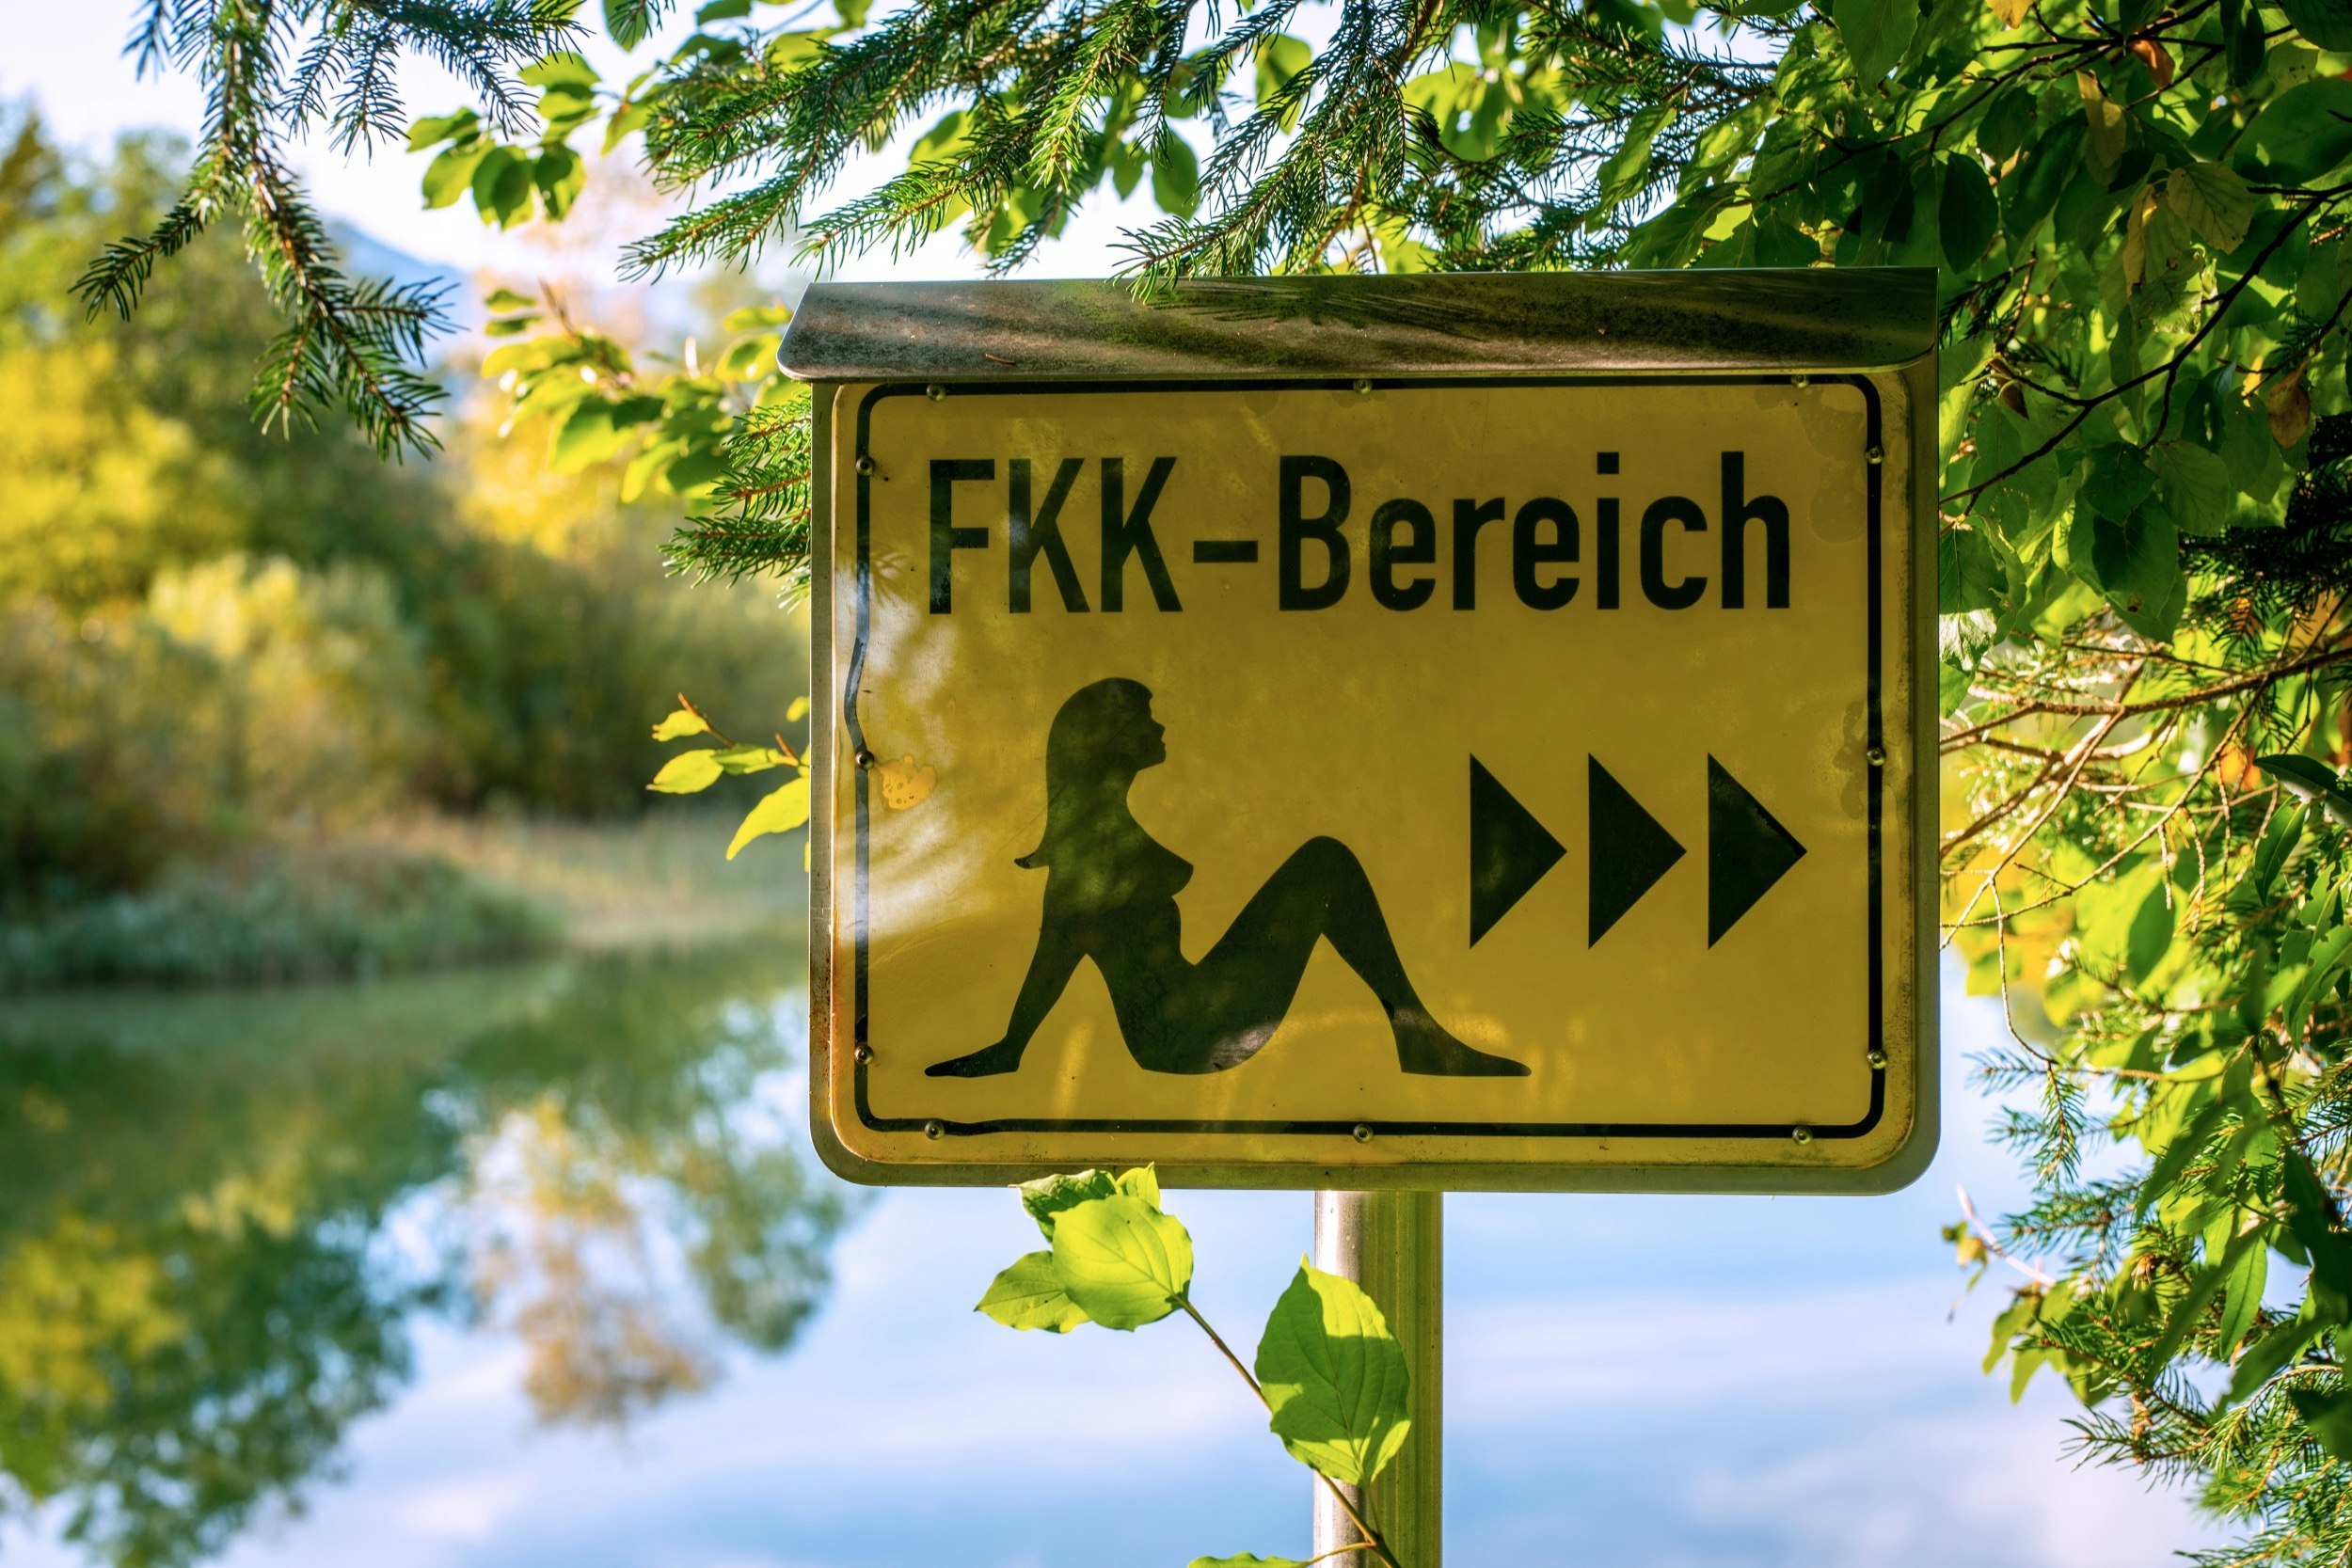 A black and yellow sign with a figure of a naked lady sitting down and arrows pointing to the right with the words "FKK Bereich" is posted near a body of water.